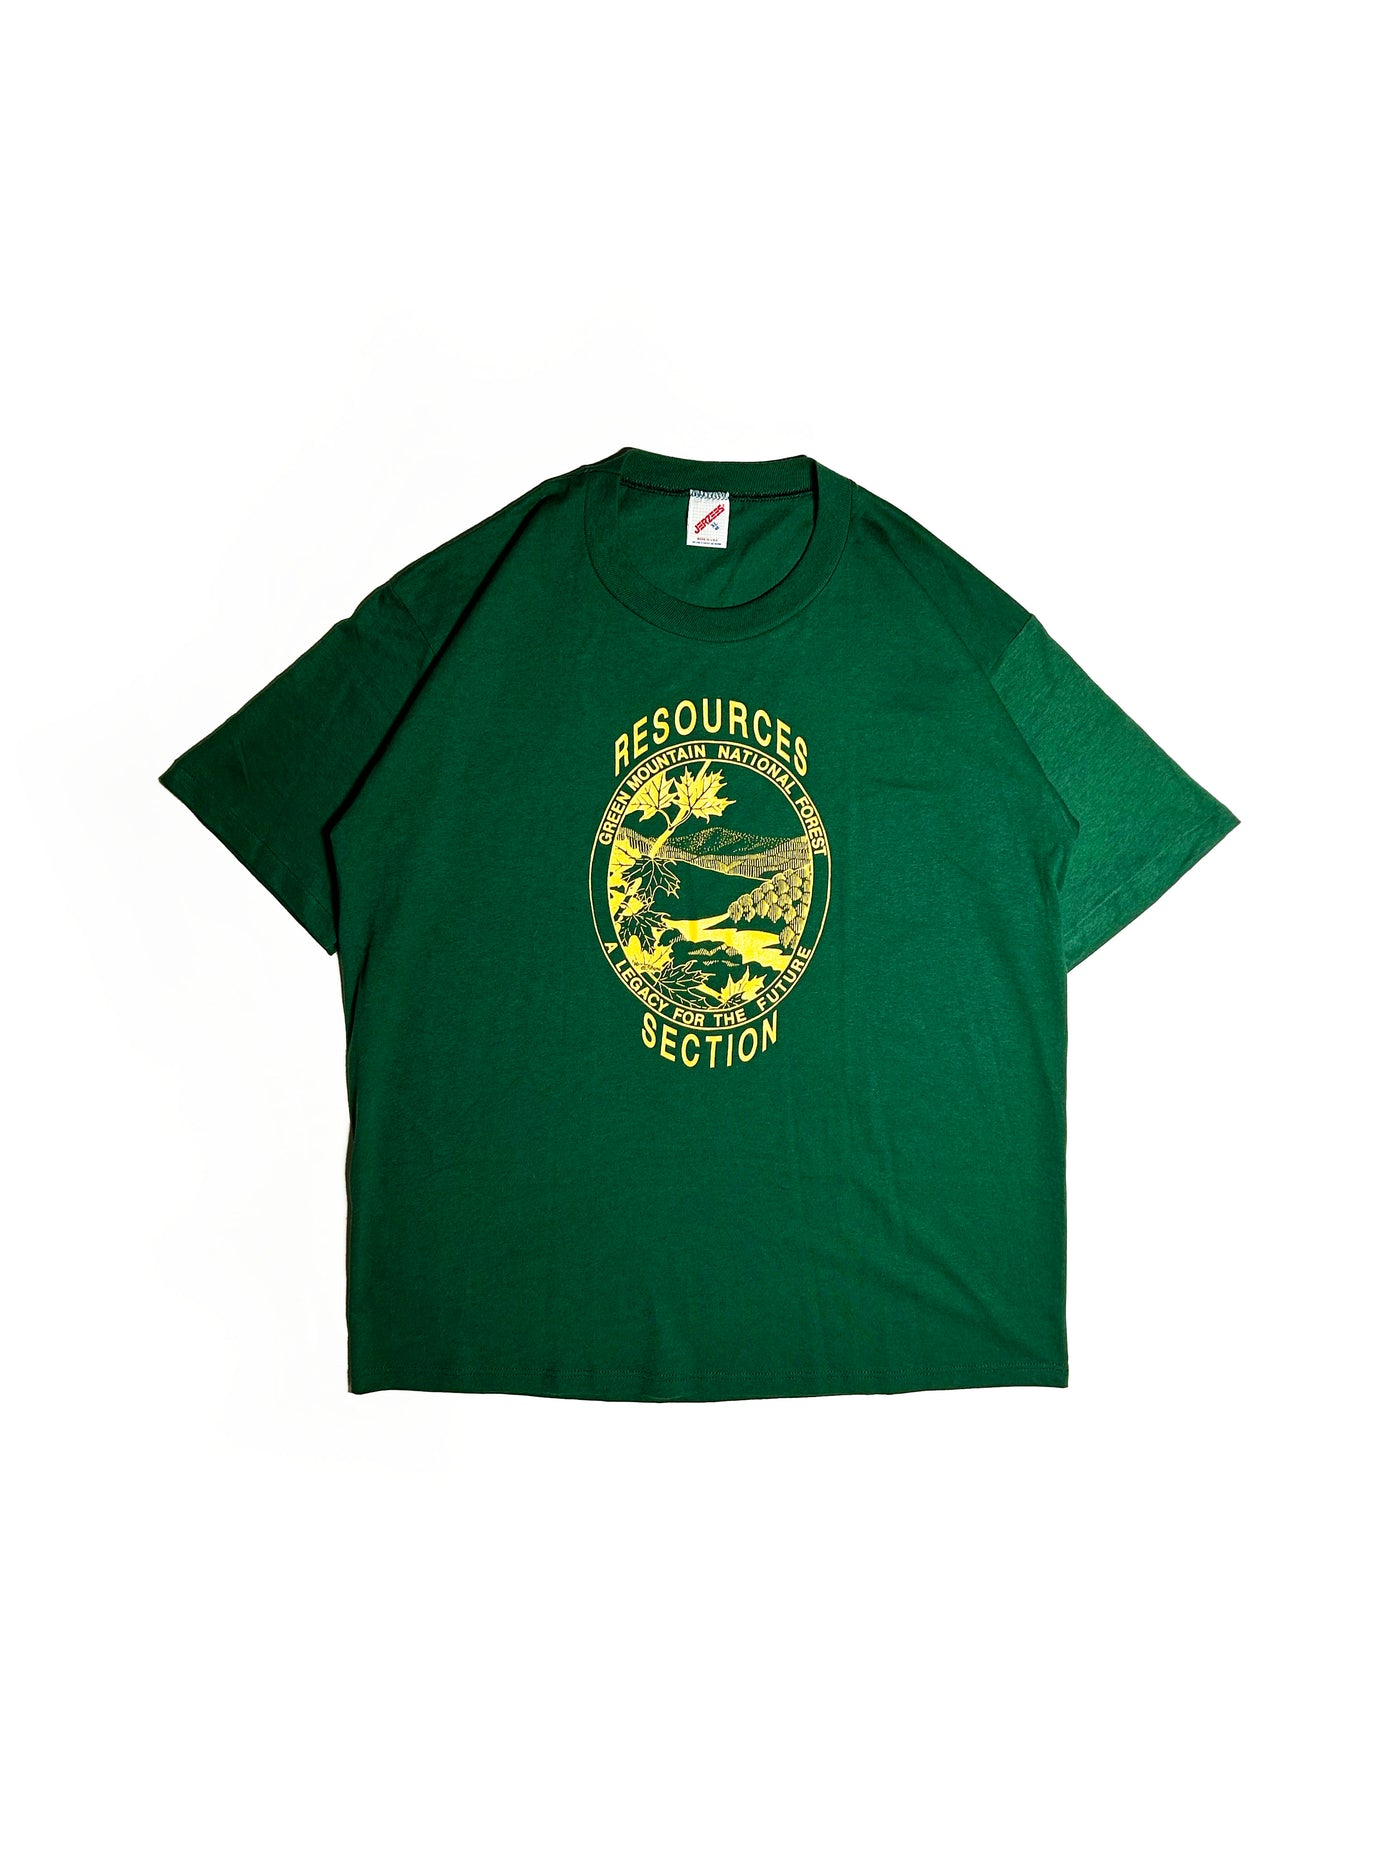 Vintage 1990 Green Mountain National Forest Staff T-Shirt